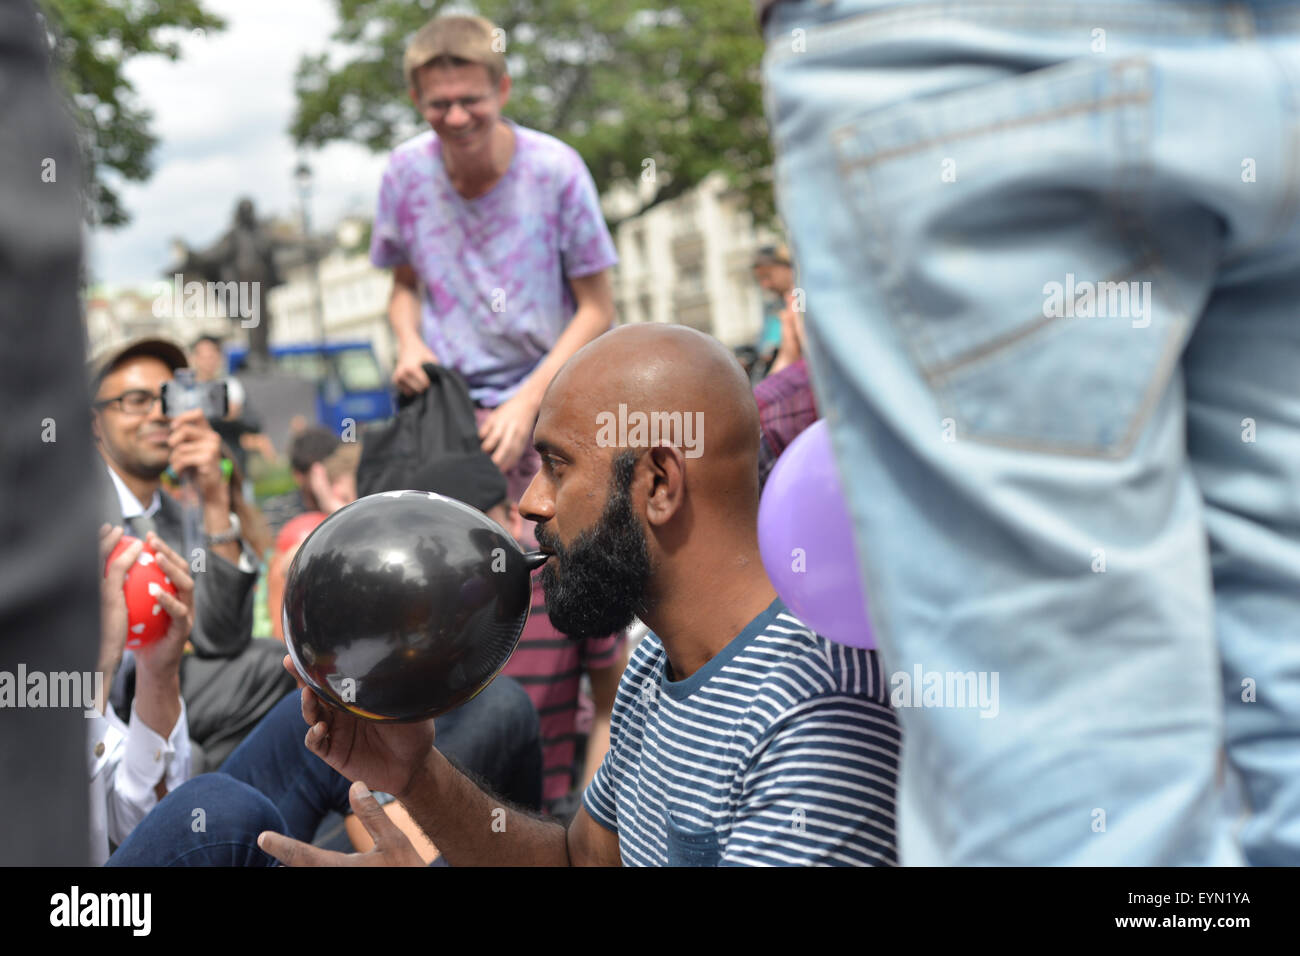 Parliament Square, London, UK. 1st August 2015. Protesters inhale nitrous oxide in Parliament Square. © Matthew Chattle/Alamy Li Stock Photo